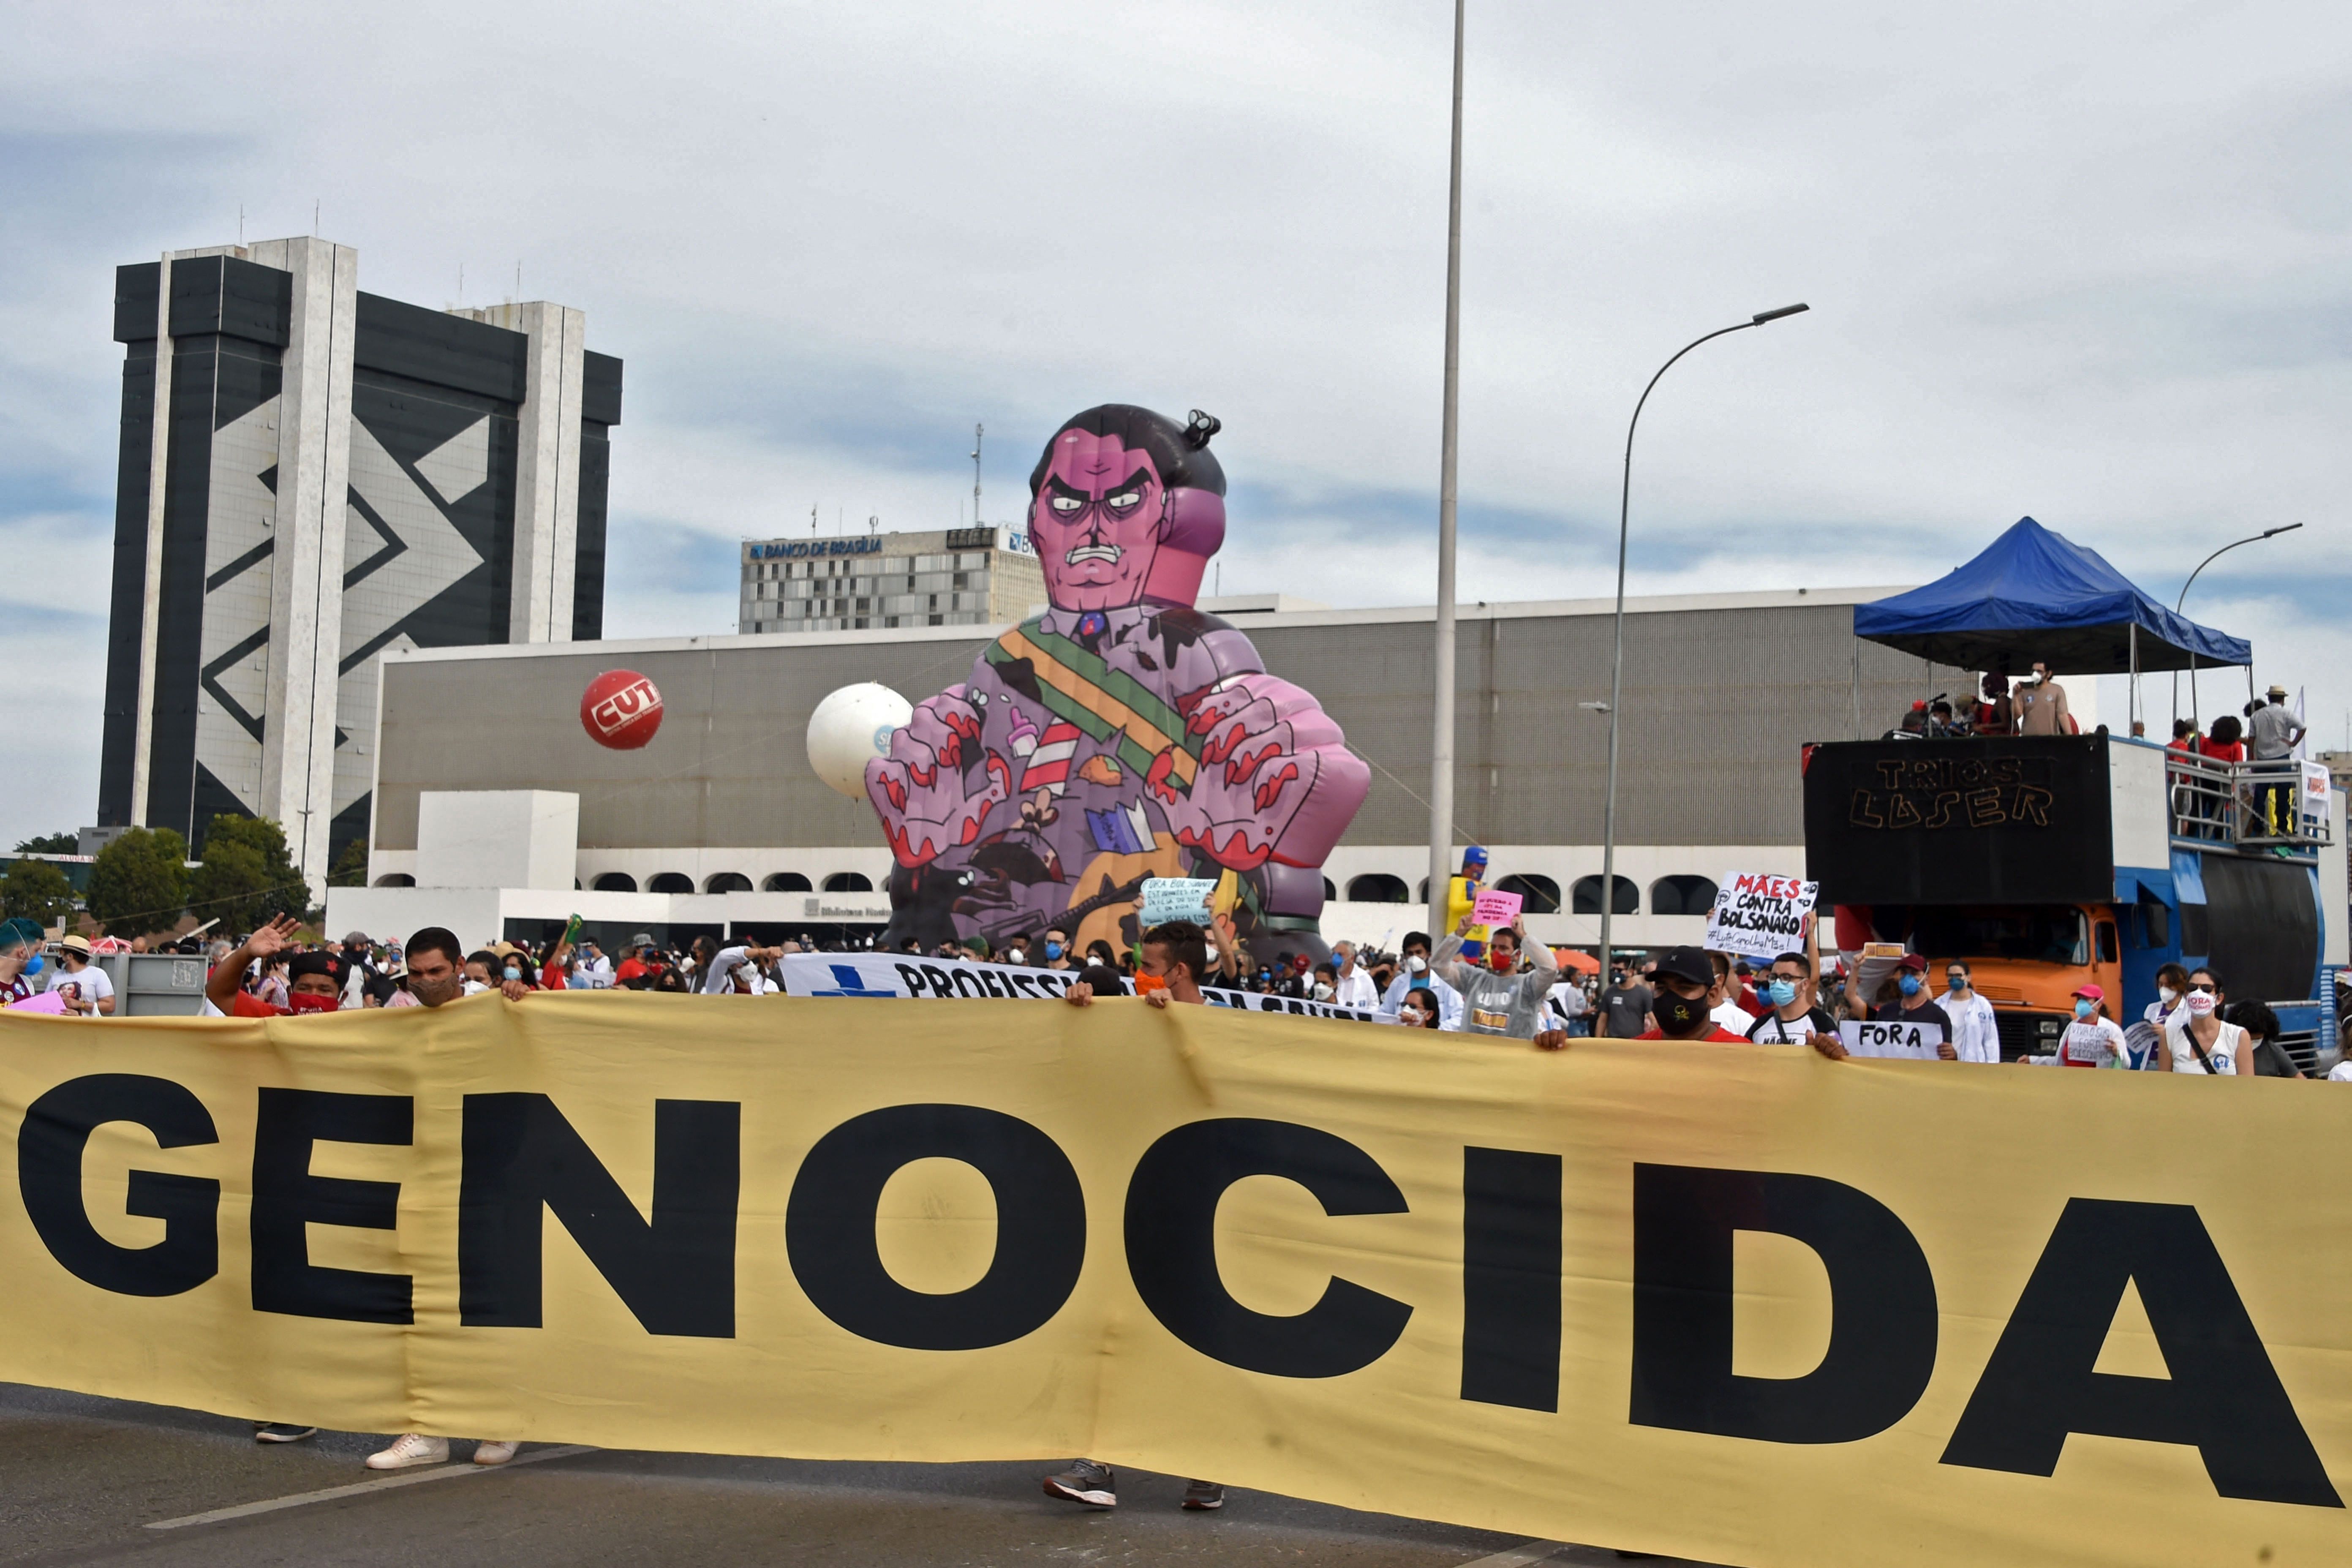 A protest against Brazilian President Jair Bolsonaro's handling of the COVID-19 pandemic with a giant inflatable doll depicting him as a monster, in Brasilia, on May 29